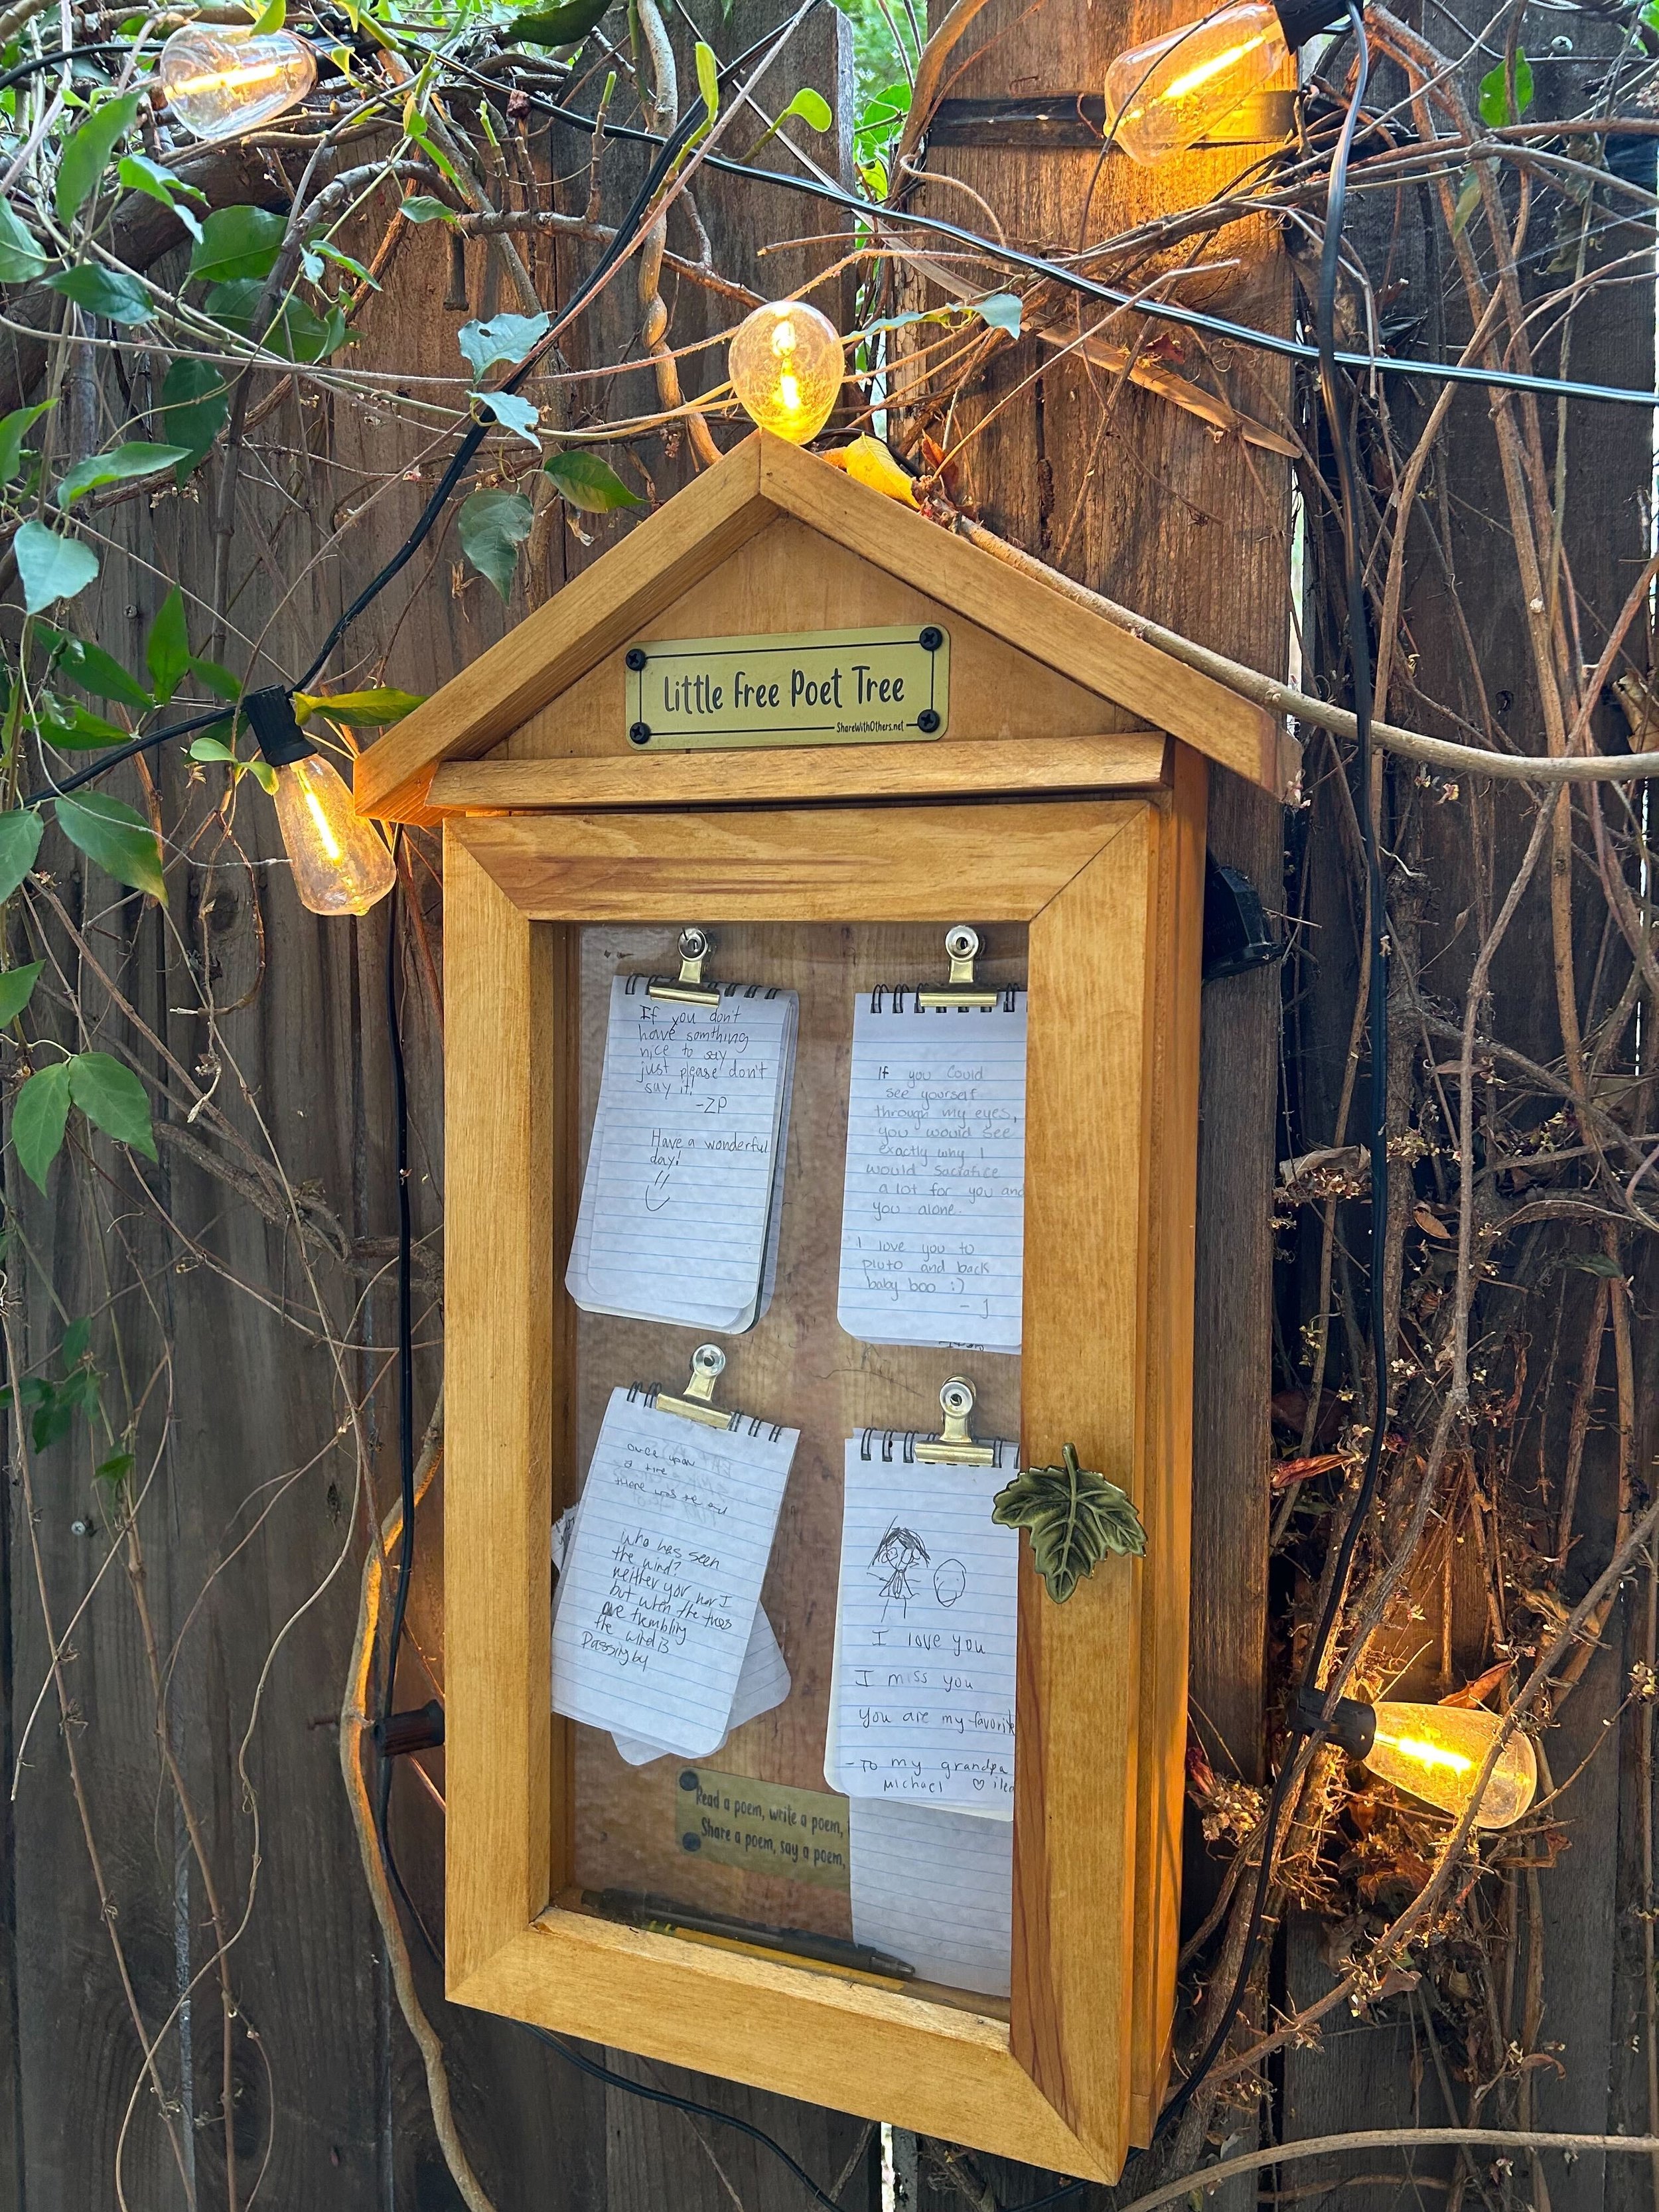 Little display with poems and notes written by visitors of the shop located outside.